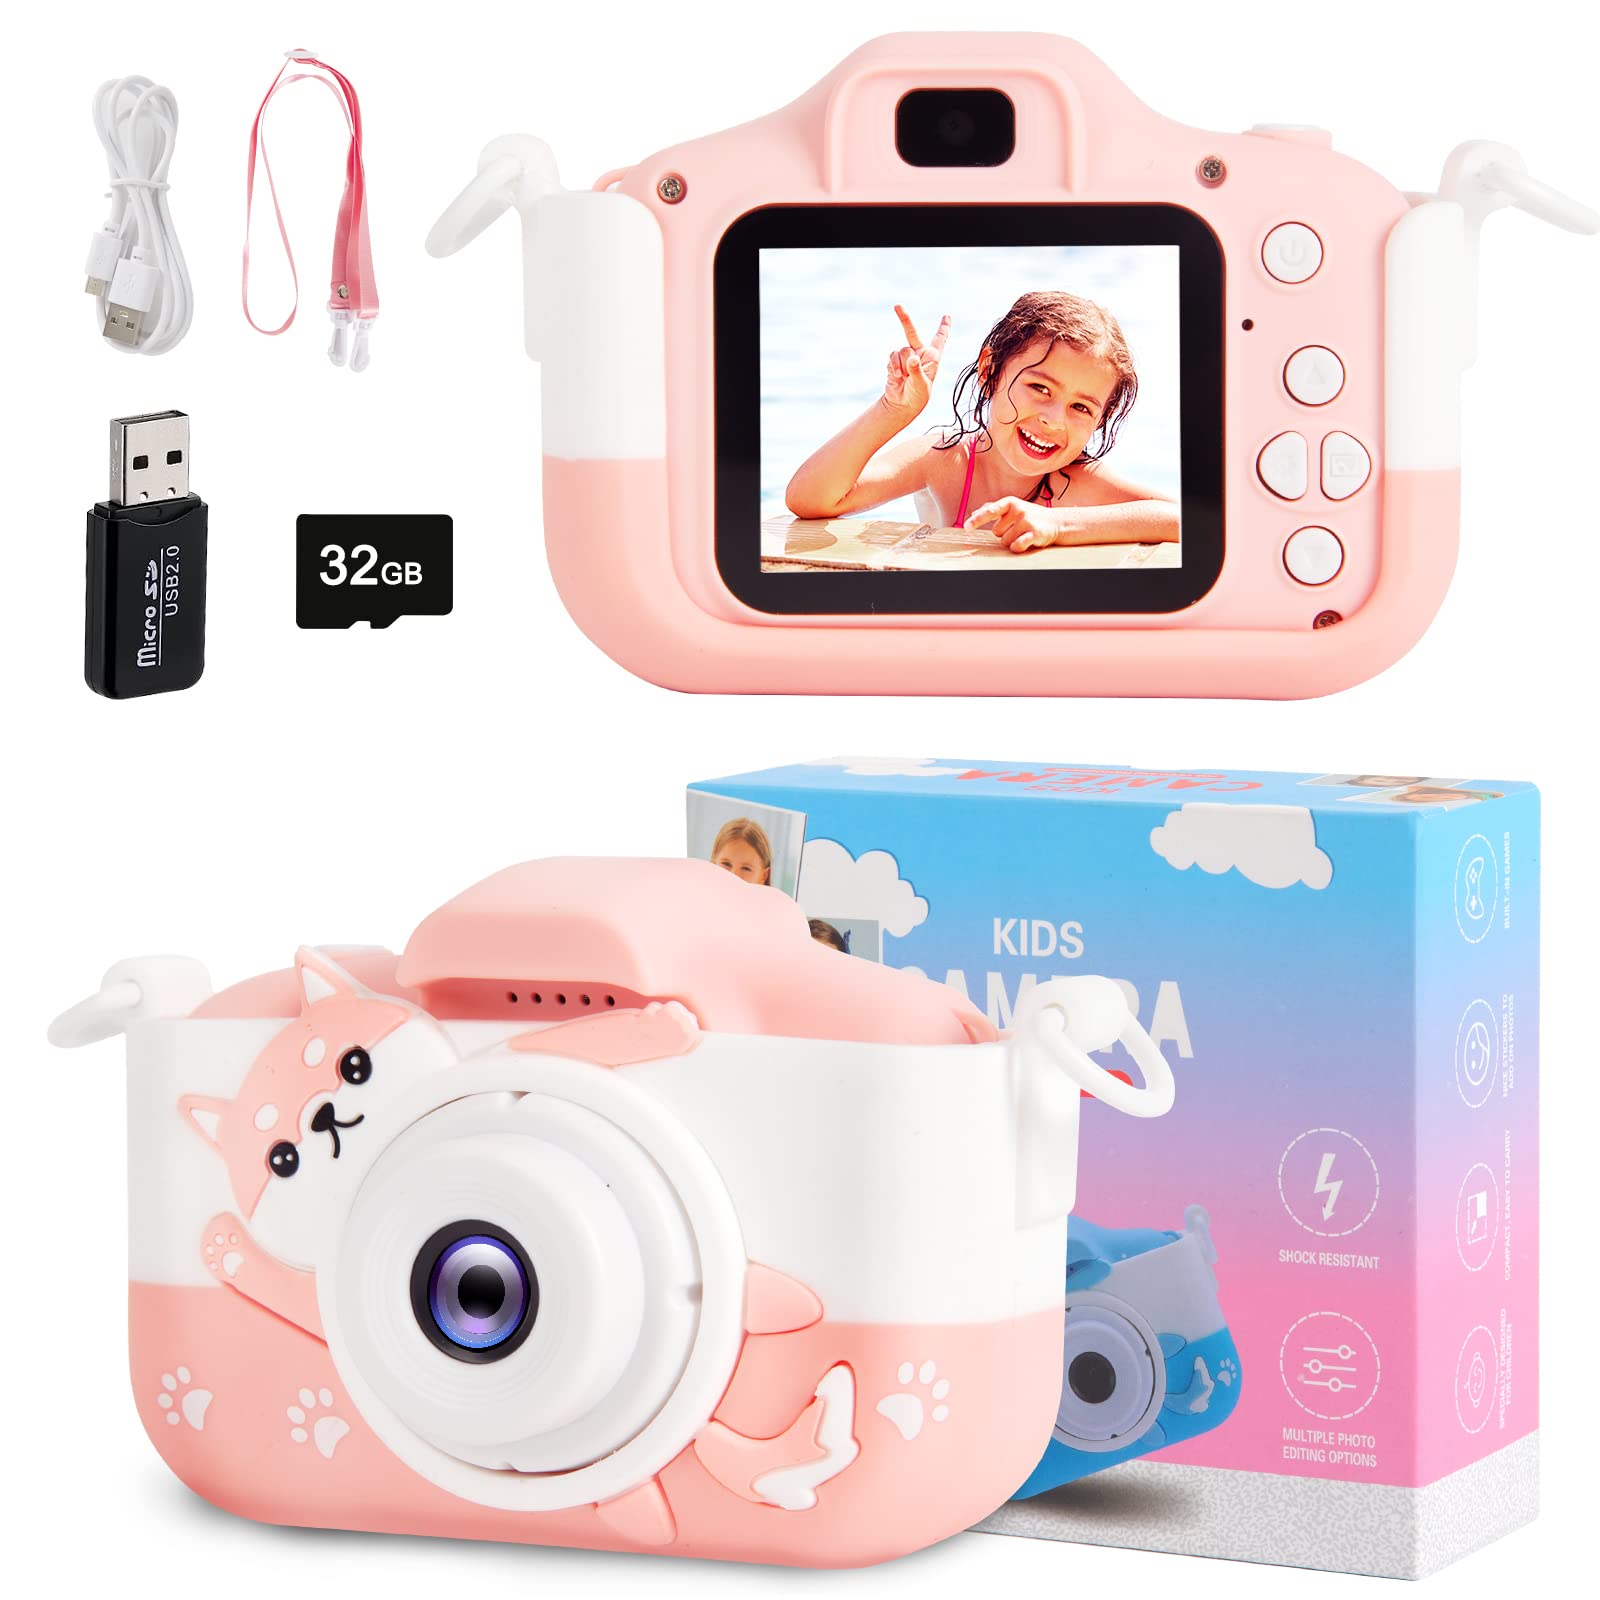 OMOTIYA Kids Camera, 1080P HD Digital Video Camcorder Camera/Upgrade Selfie Camera with Dog Soft Silicone Cover, for Boys/Girls Age 3-12, Birthday Gifts with 32GB TF Card Pink